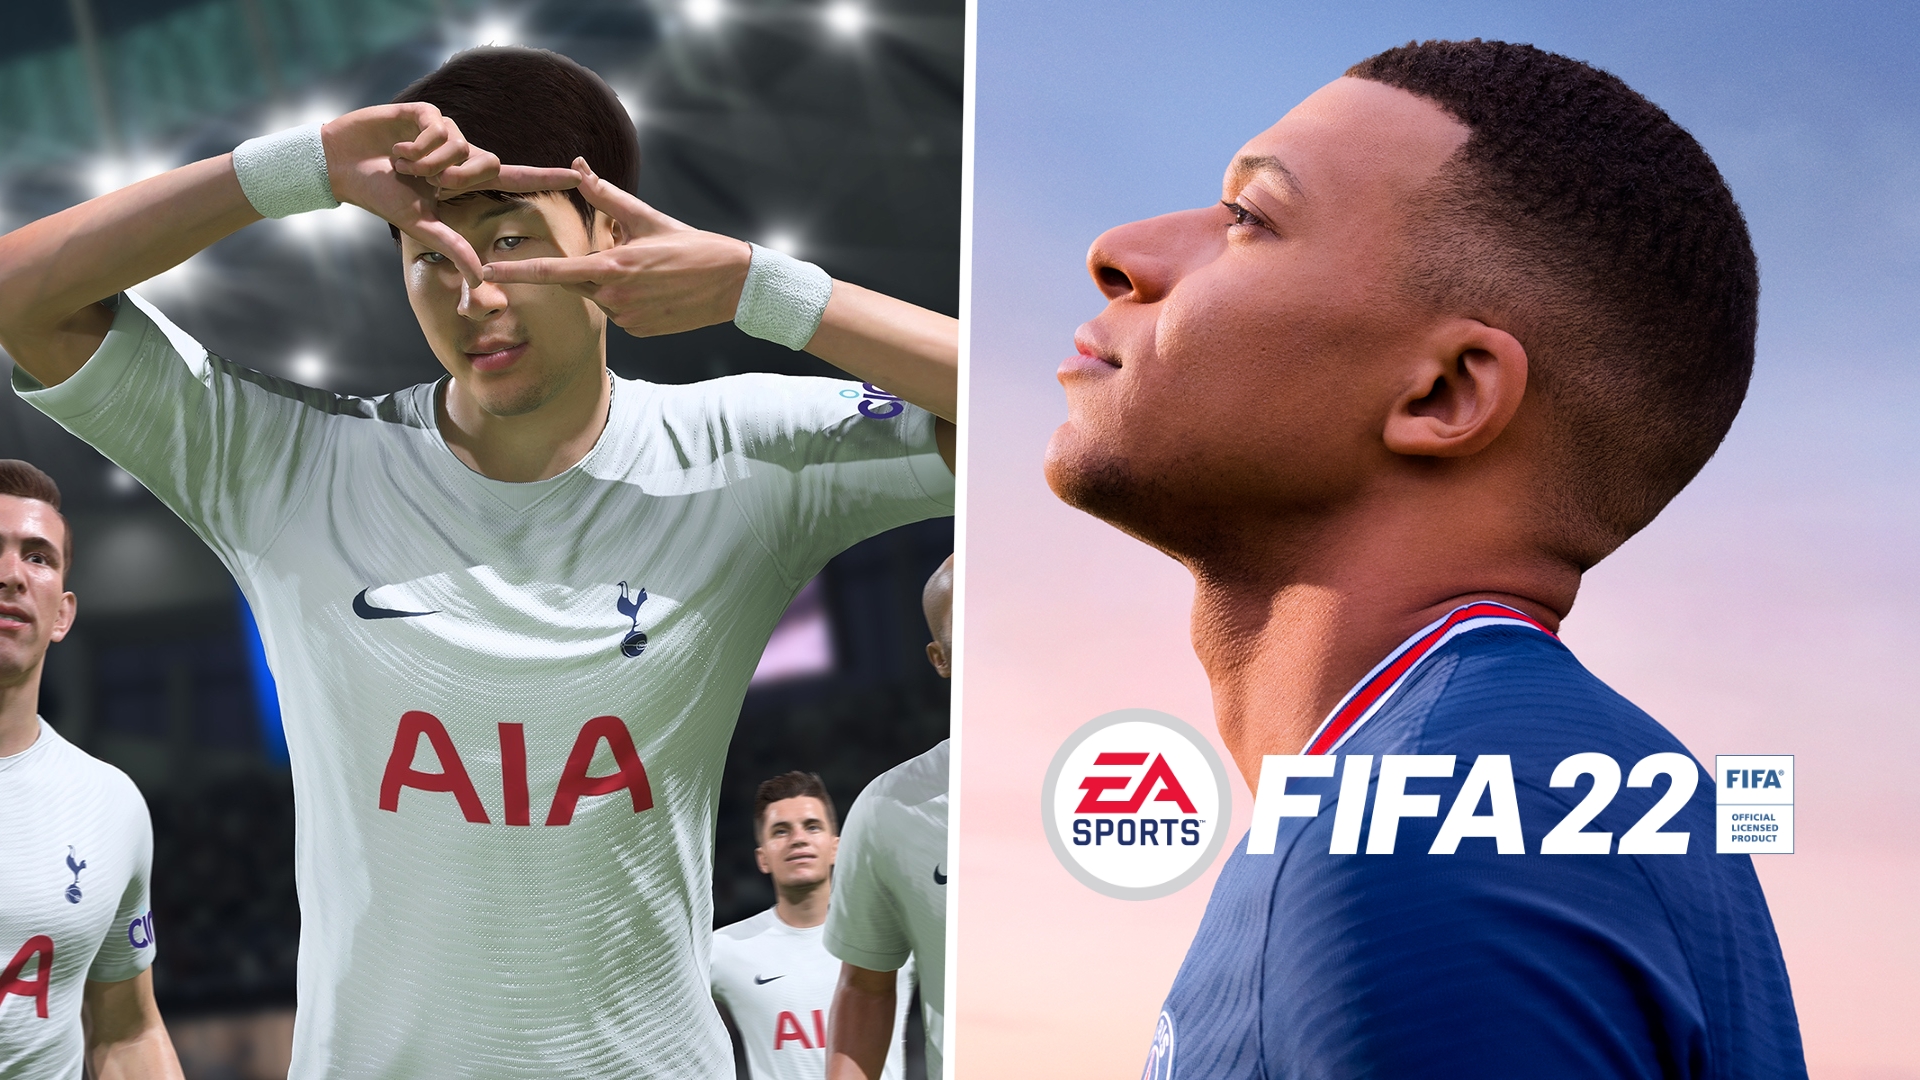 FIFA 22 pre-order bonuses: Ultimate edition & standard edition add-ons & price differences